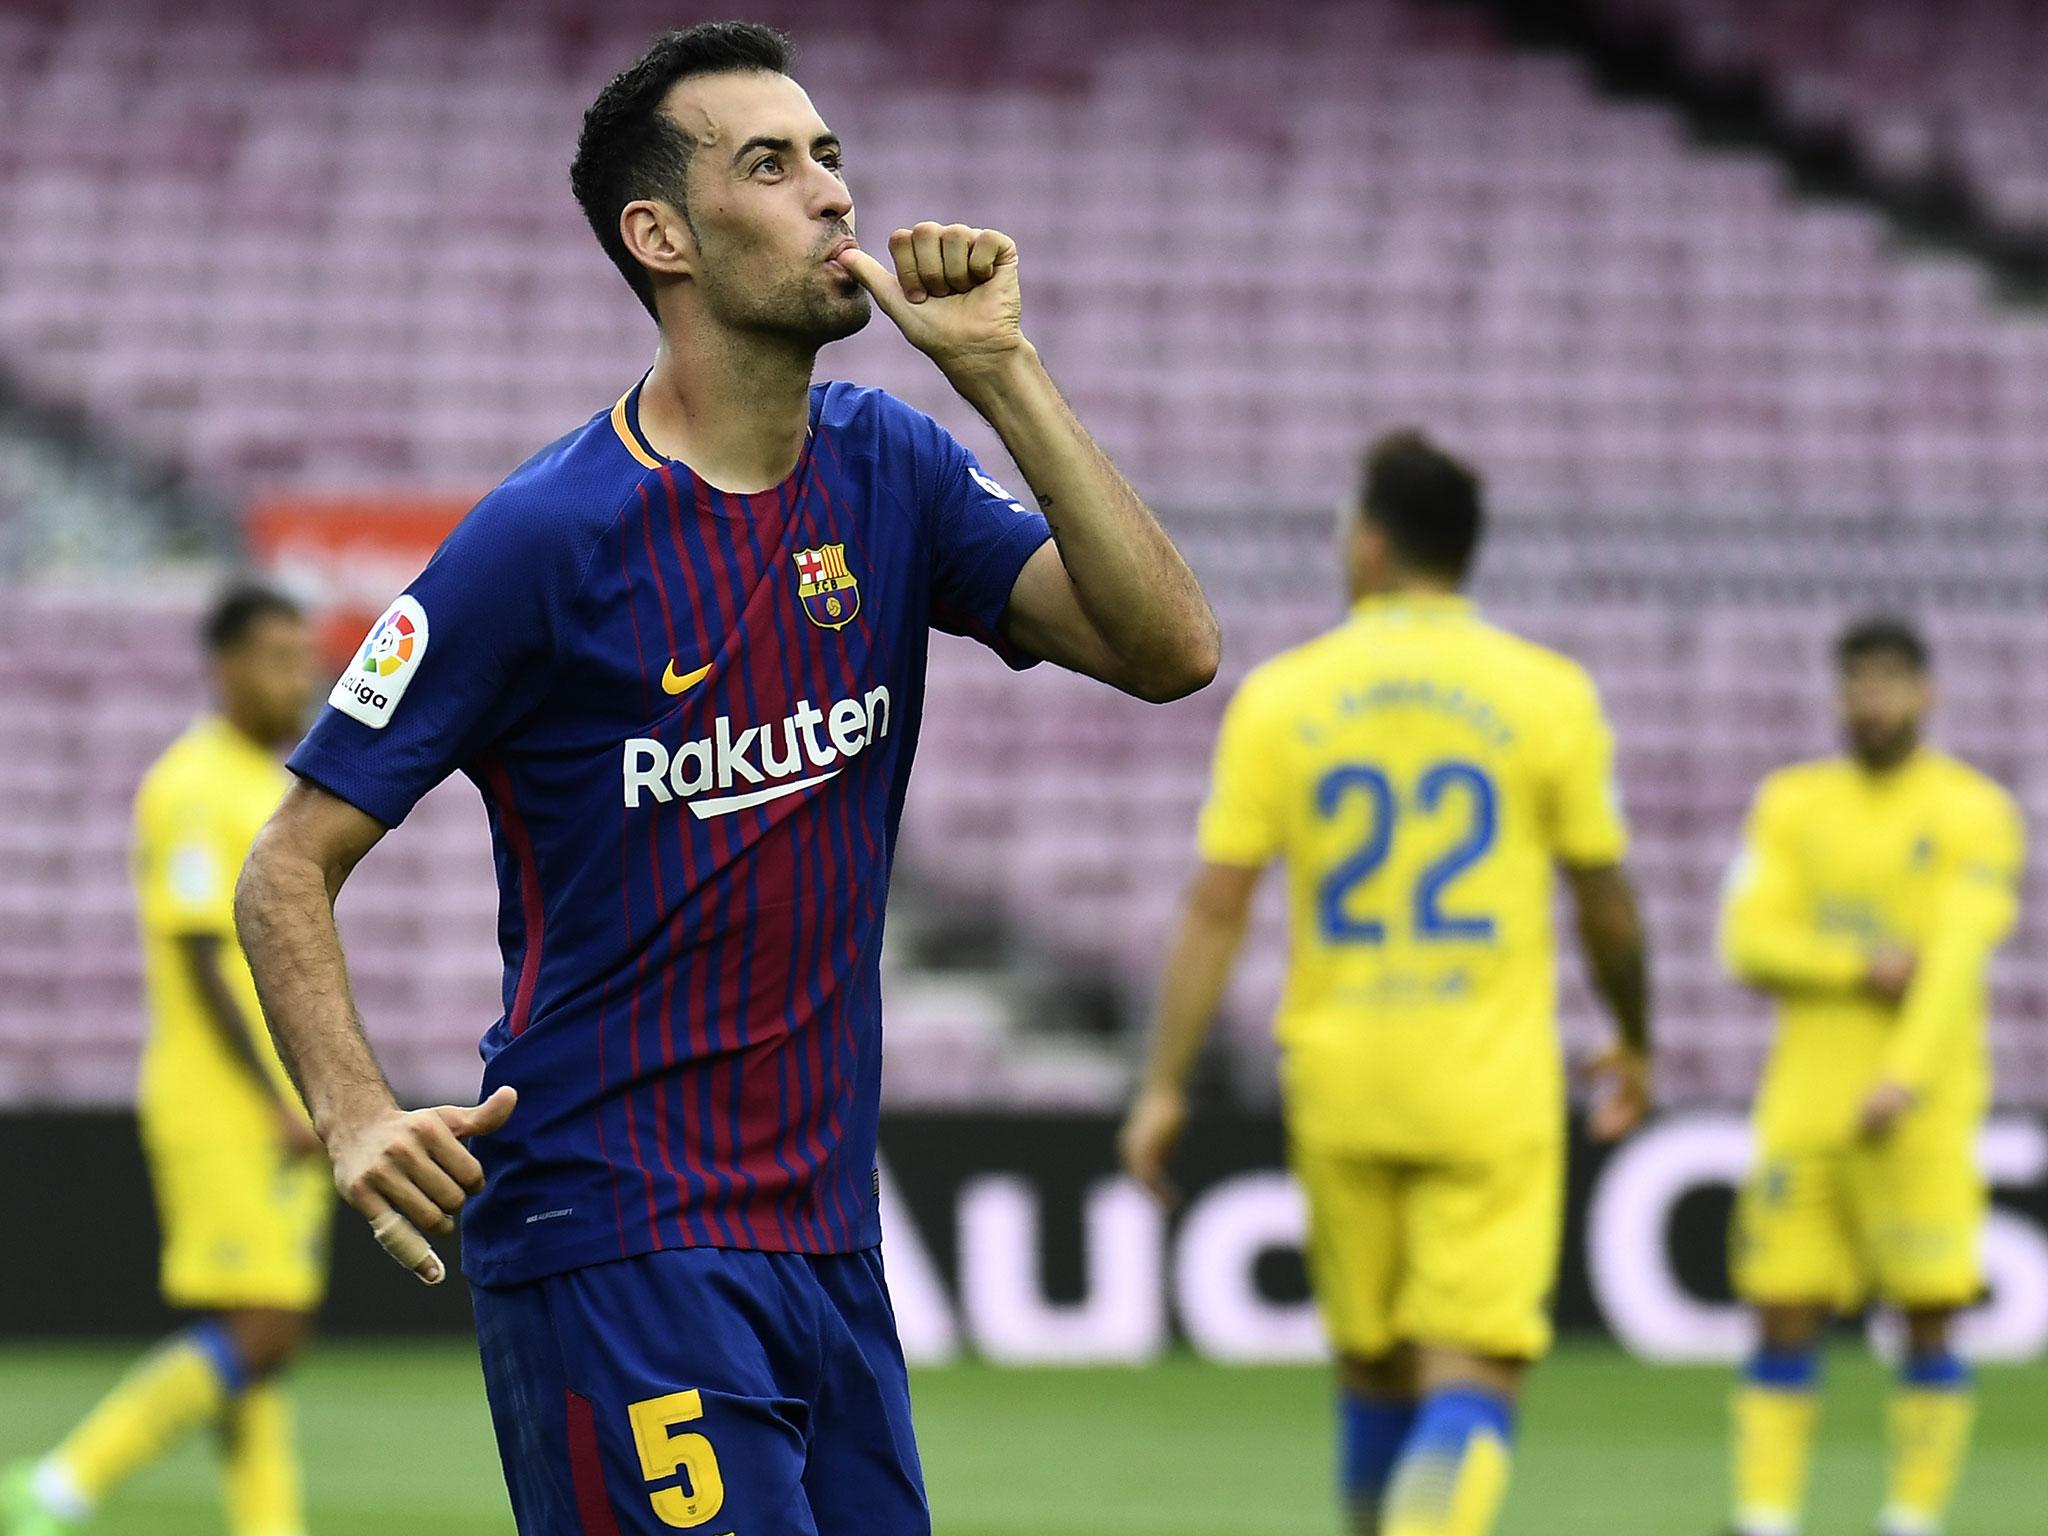 The midfielder is key to Barcelona's system